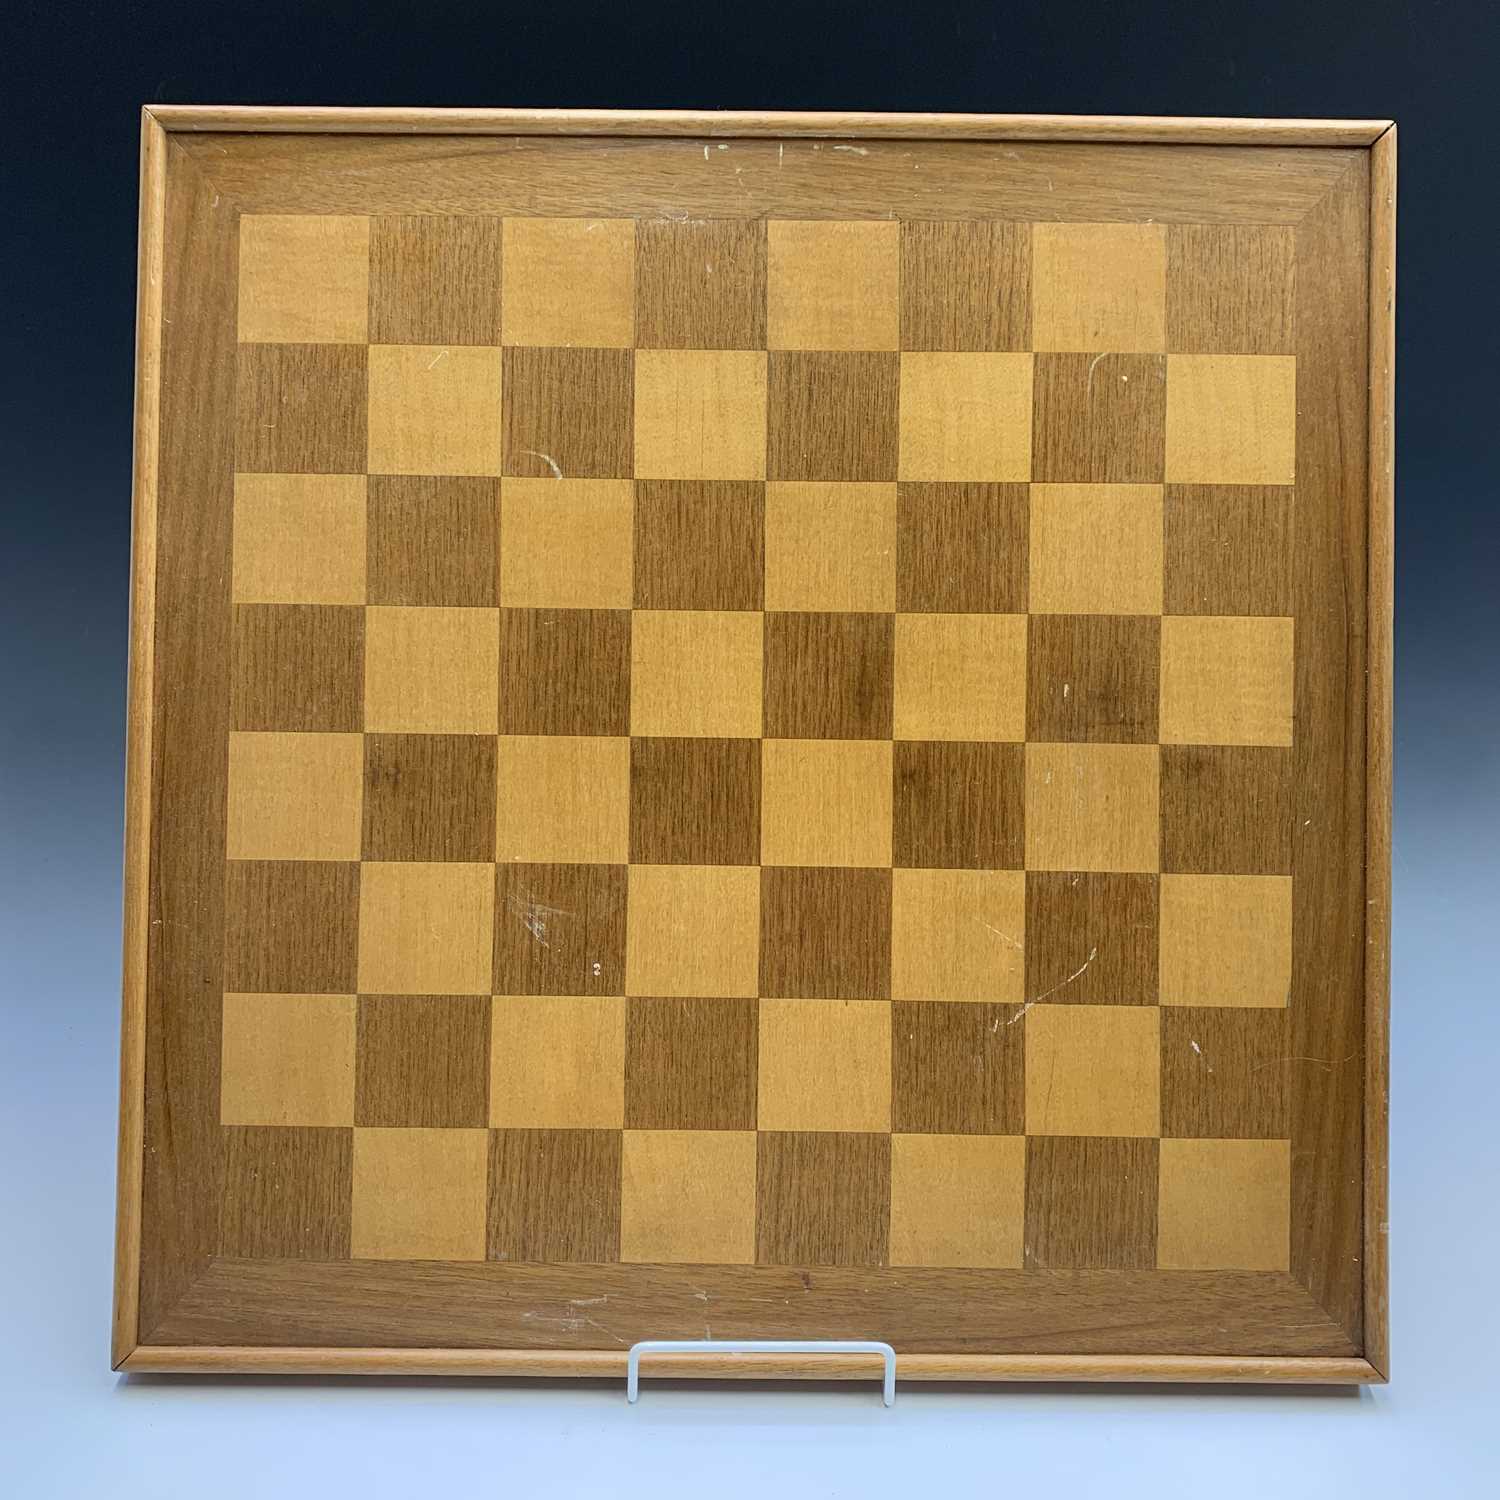 A Staunton type boxwood and ebony chess set, the Kings height 7.5cm, together with a similar set, in - Image 2 of 6